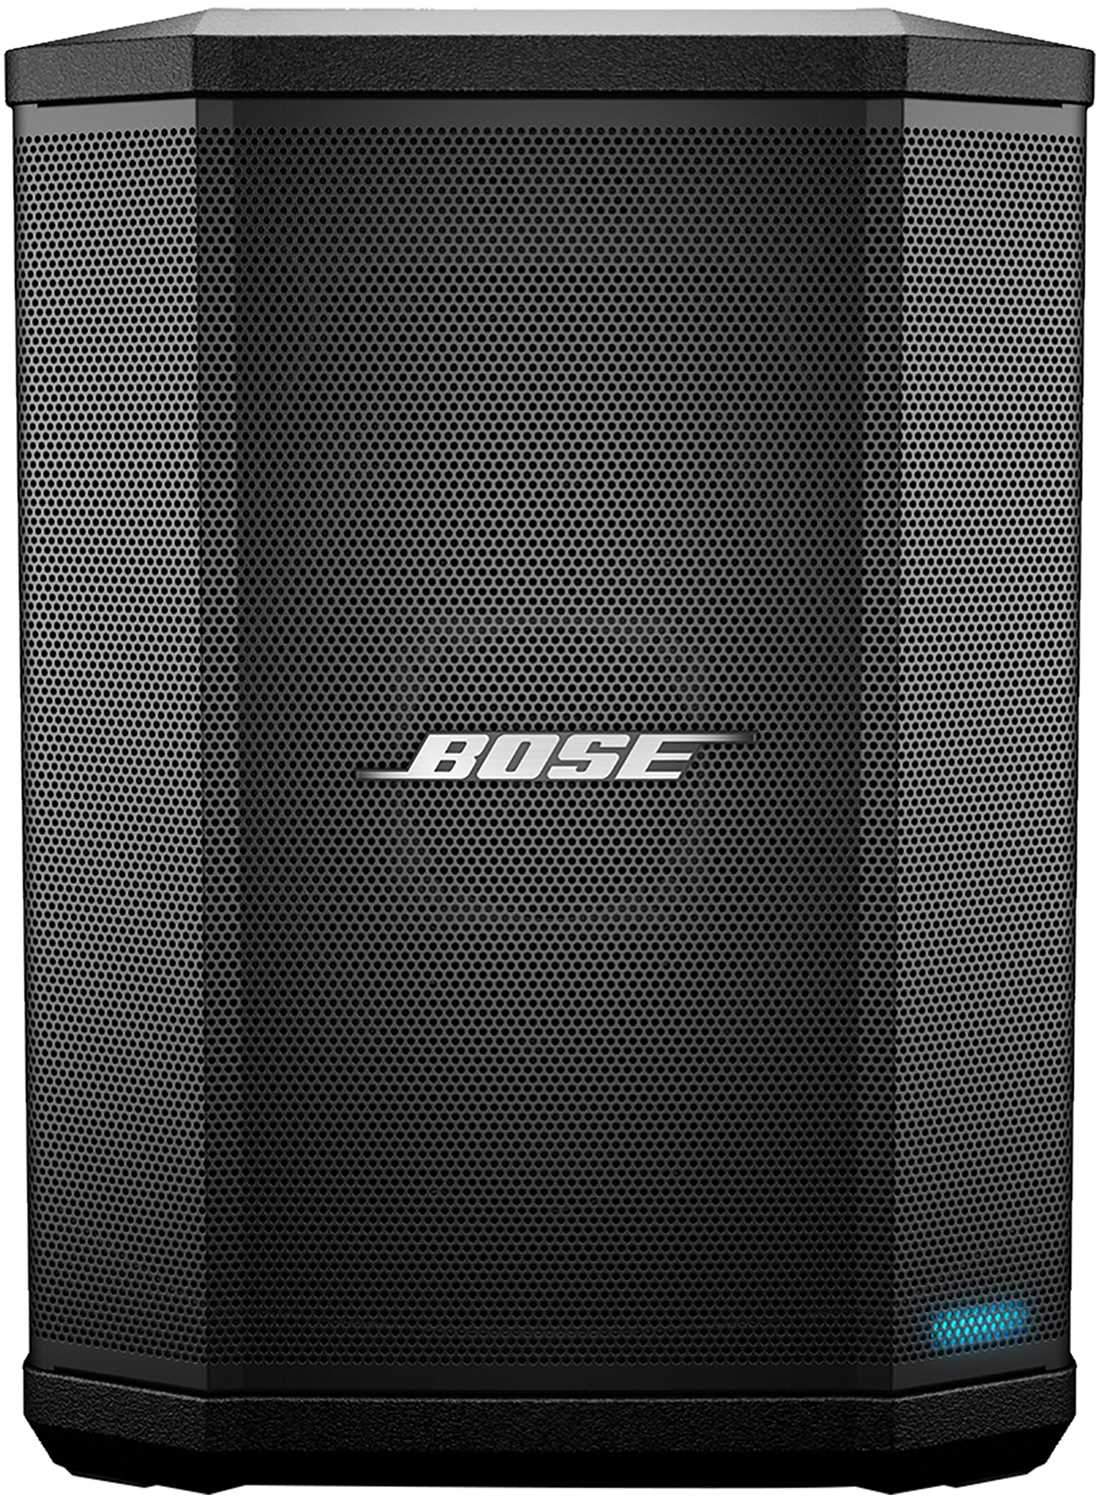 Bose S1 Bluetooth Battery Powered PA Speaker with SM58 Mic - PSSL ProSound and Stage Lighting